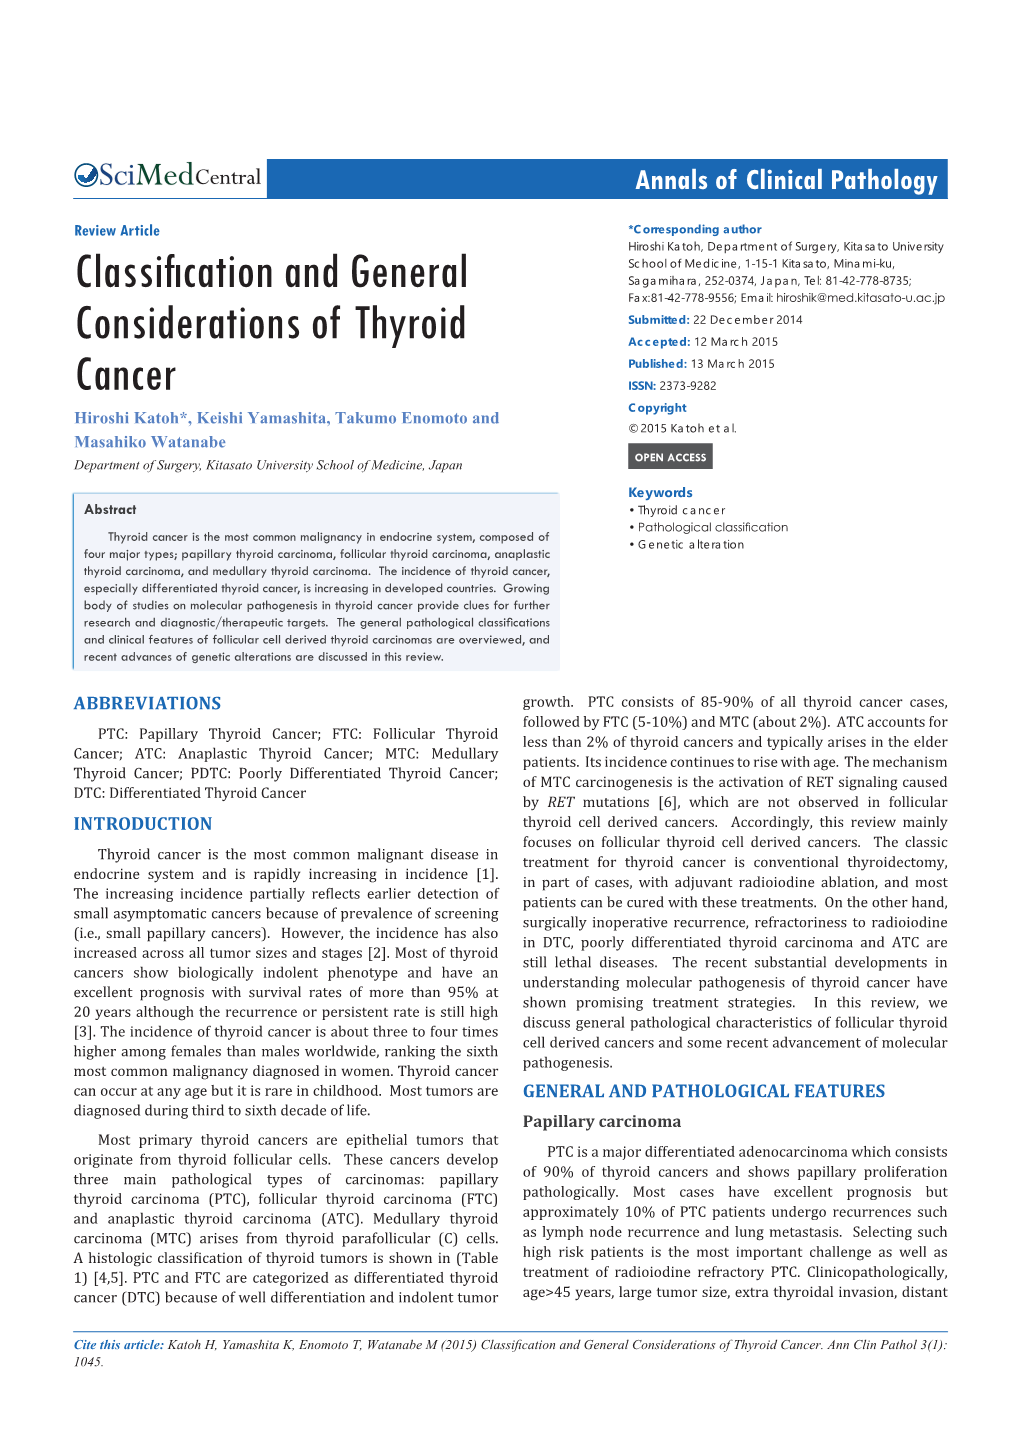 Classification and General Considerations of Thyroid Cancer